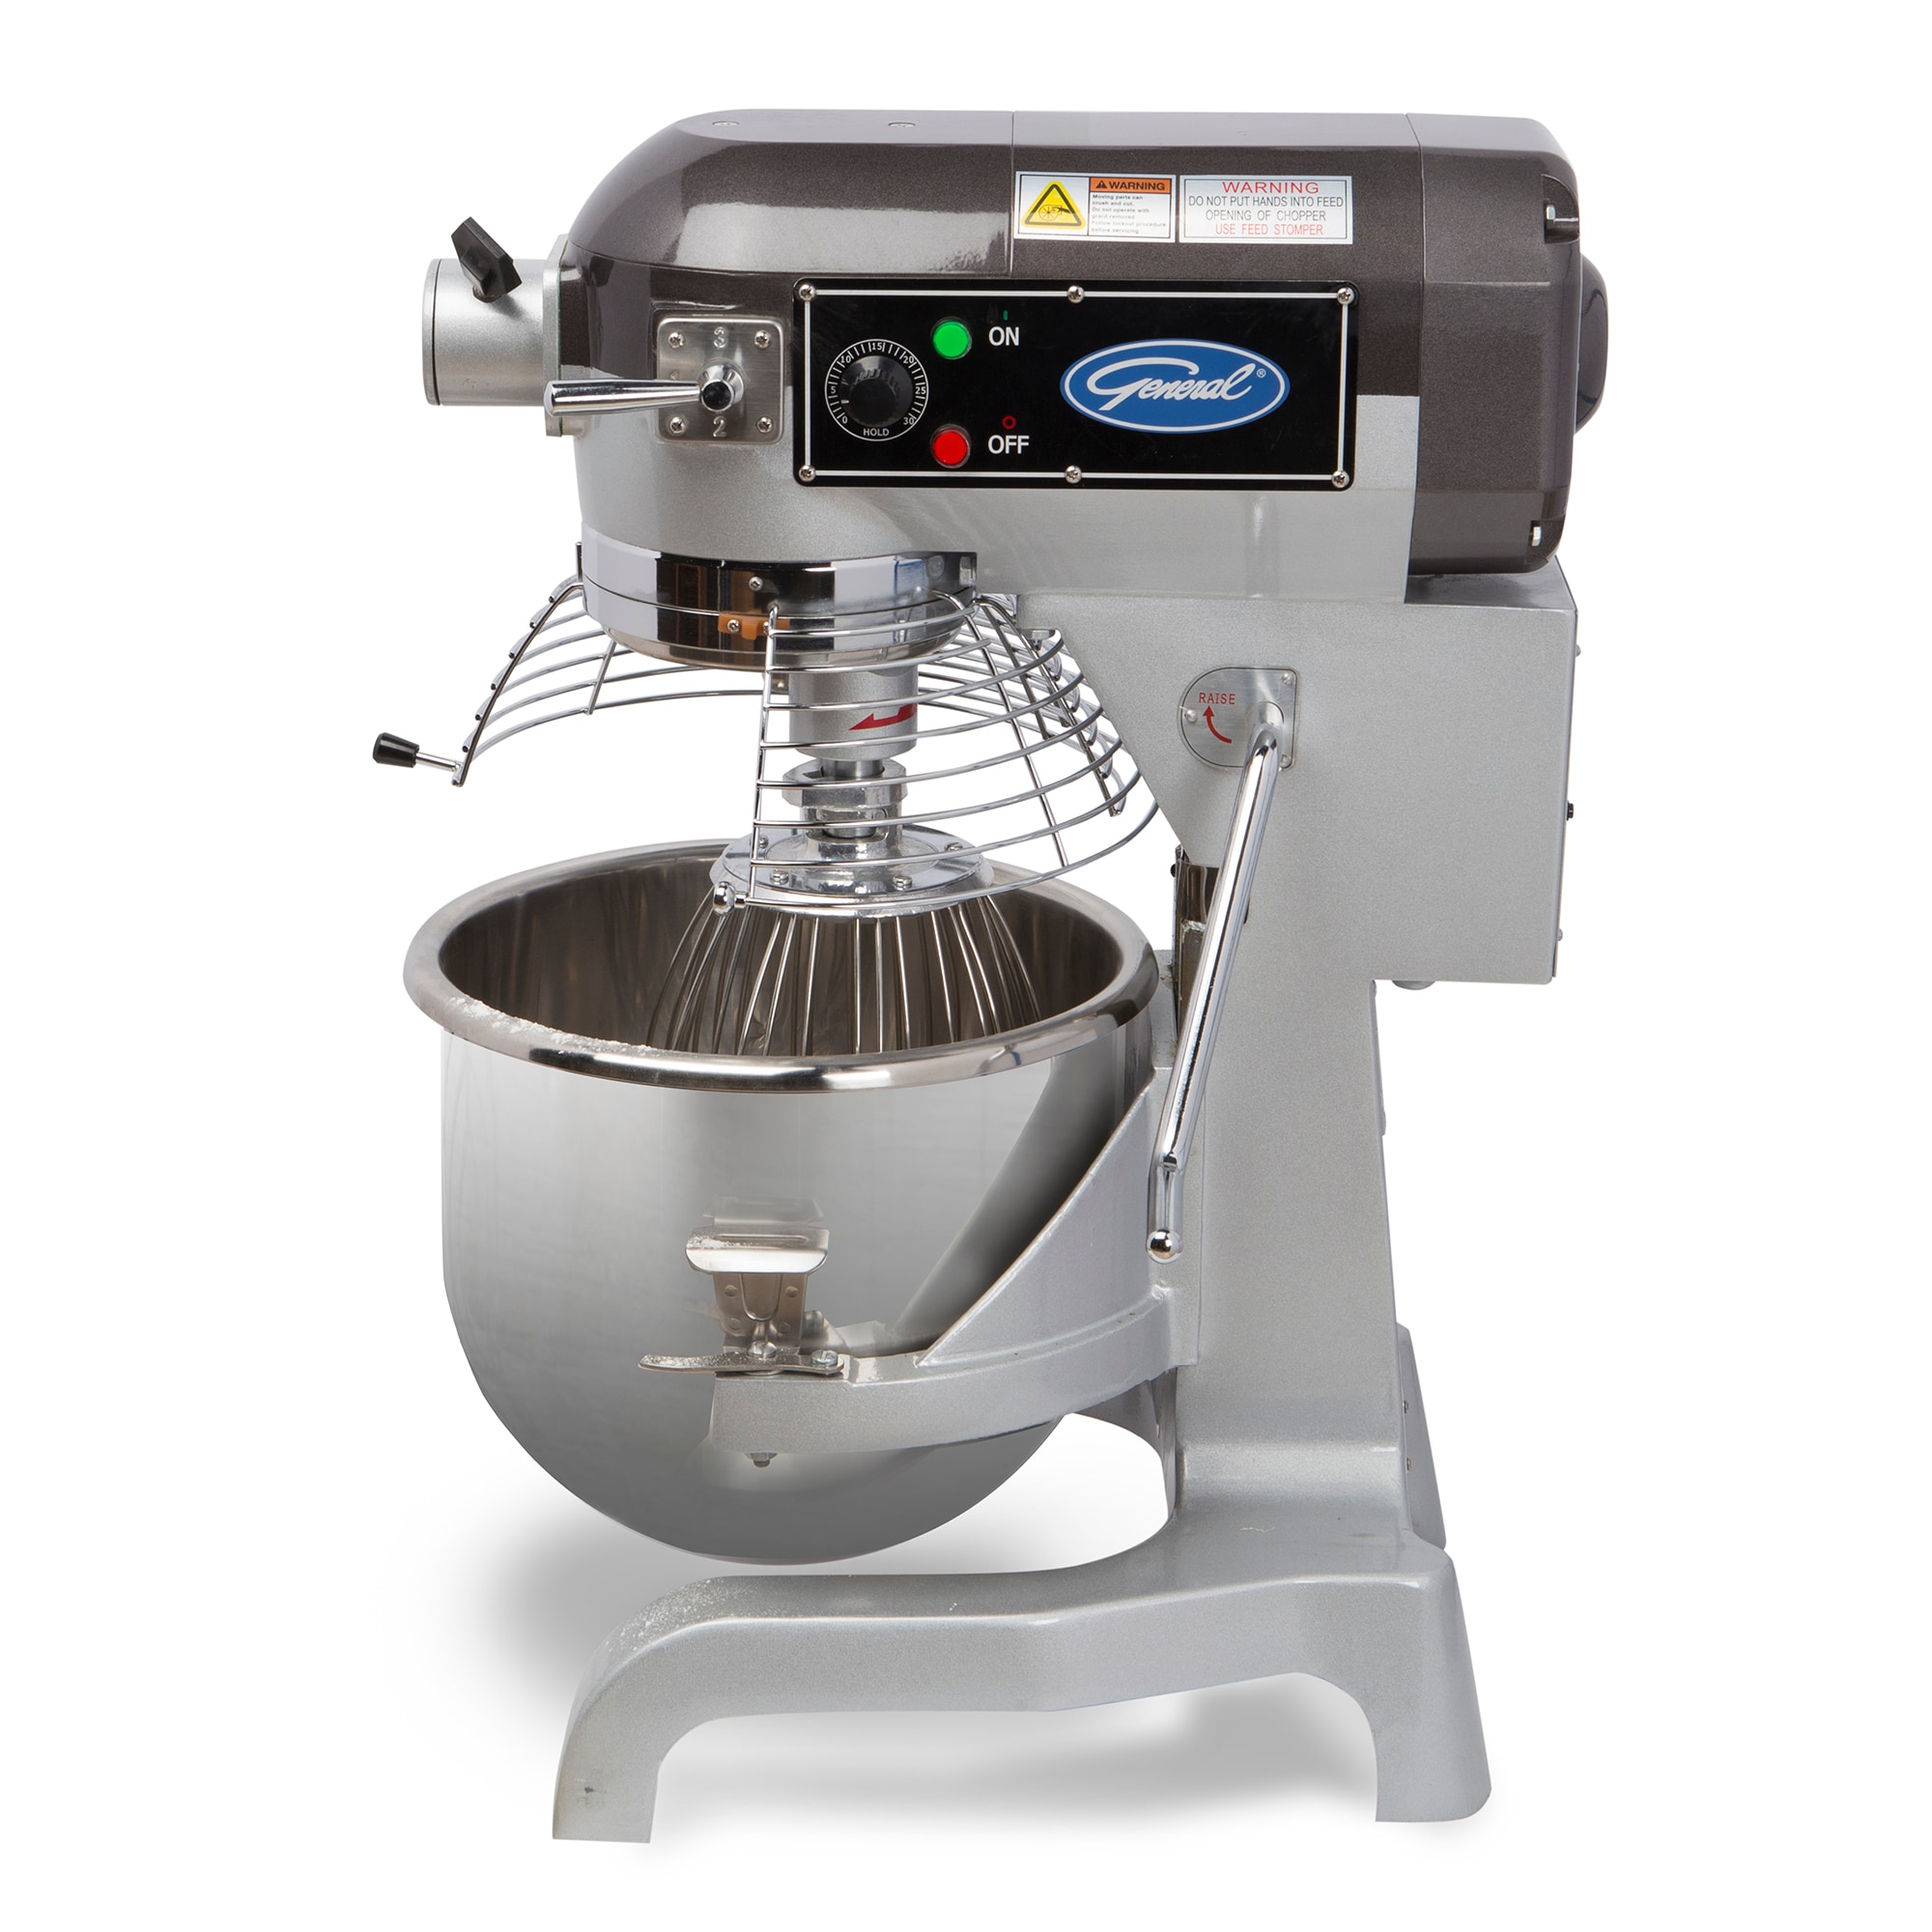  INTBUYING Commercial Food Mixer 16Qt Planetary Mixer Stand Mixer  Vertical Dough Mixer 3 Speed Stand Spiral Mixer Dough Kneading Machine For  Bakery Shop 110V : Industrial & Scientific